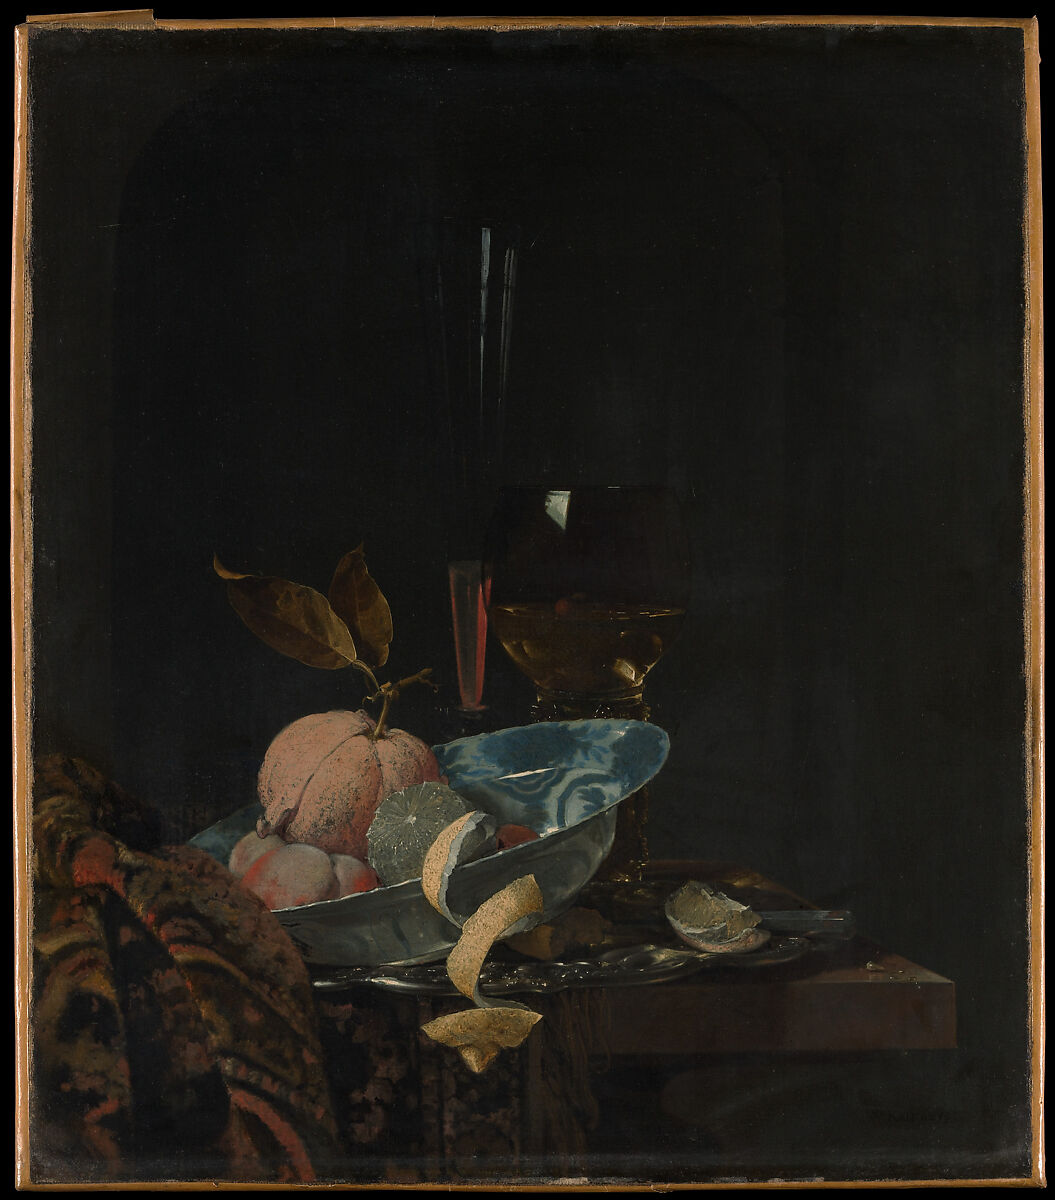 Still Life with Fruit, Glassware, and a Wanli Bowl, Willem Kalf, Oil on canvas